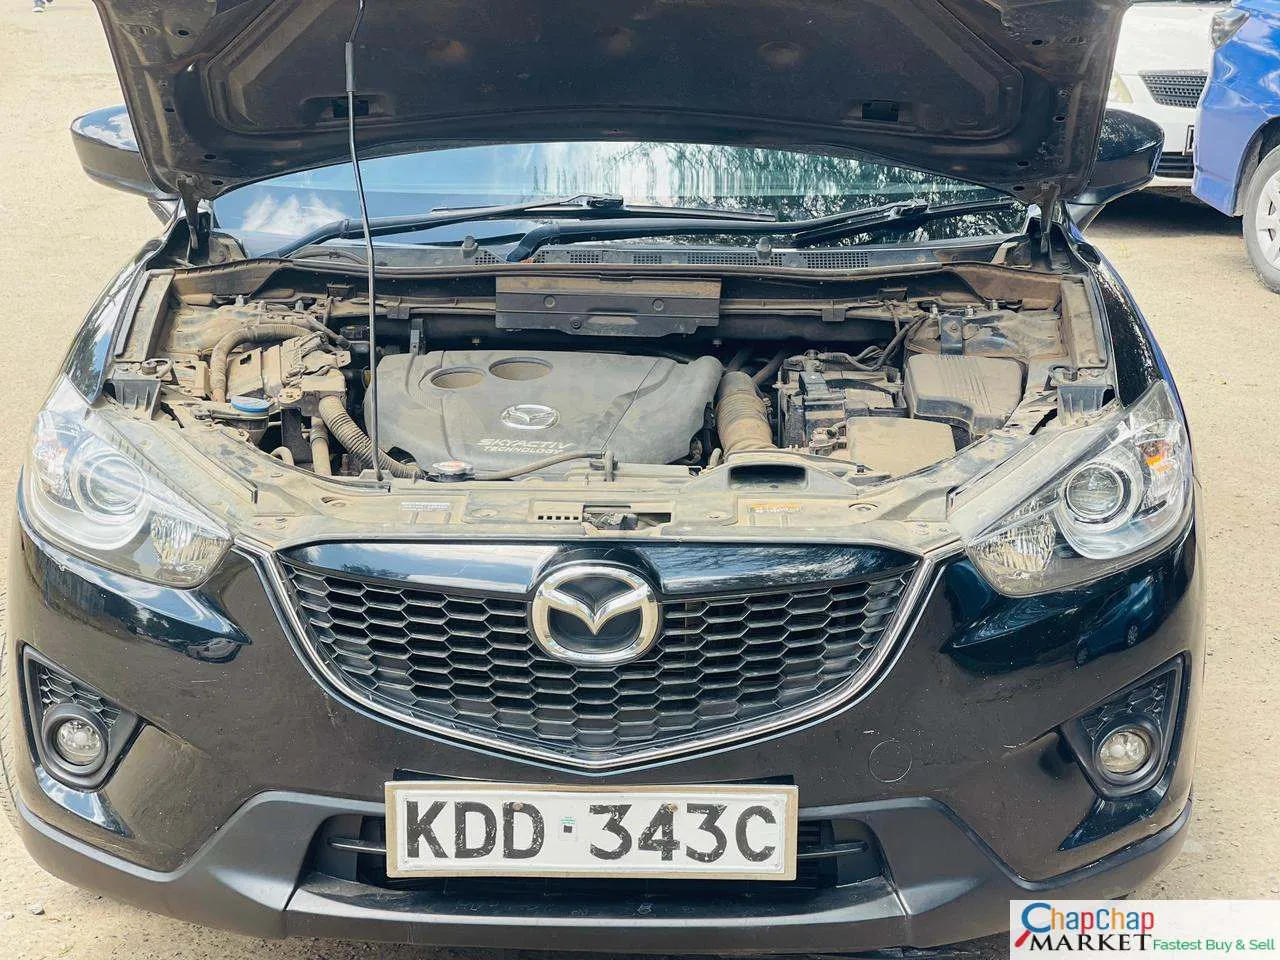 Mazda CX5 for sale in kenya hire purchase installments You Pay 30% DEPOSIT TRADE IN OK EXCLUSIVE Mazda cx5 Kenya petrol 🔥